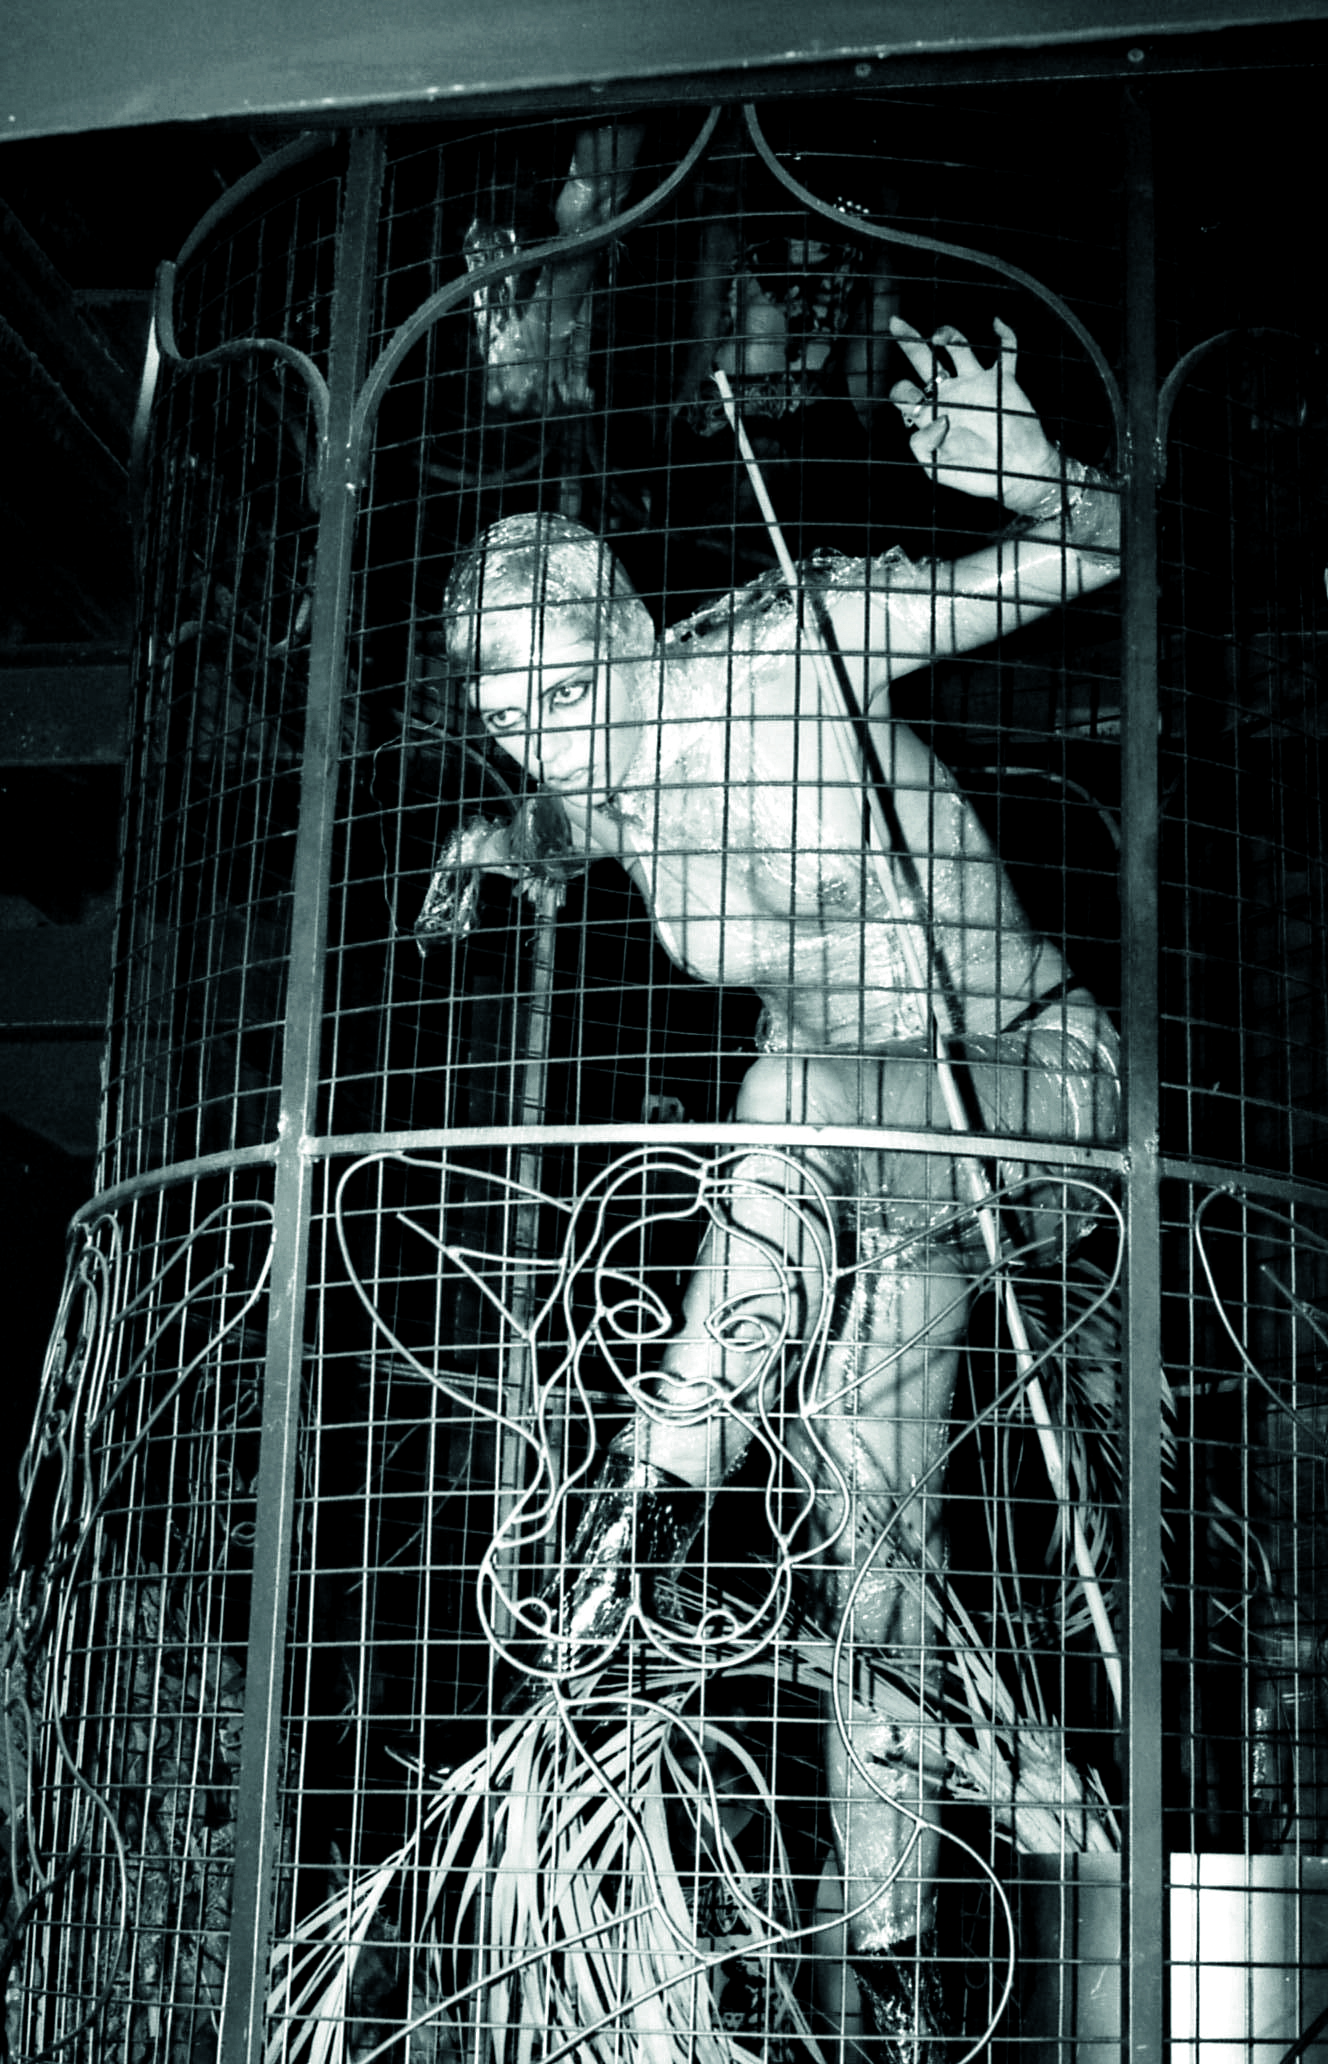 a topless person wrapped in clingfilm poses creepily inside a cage